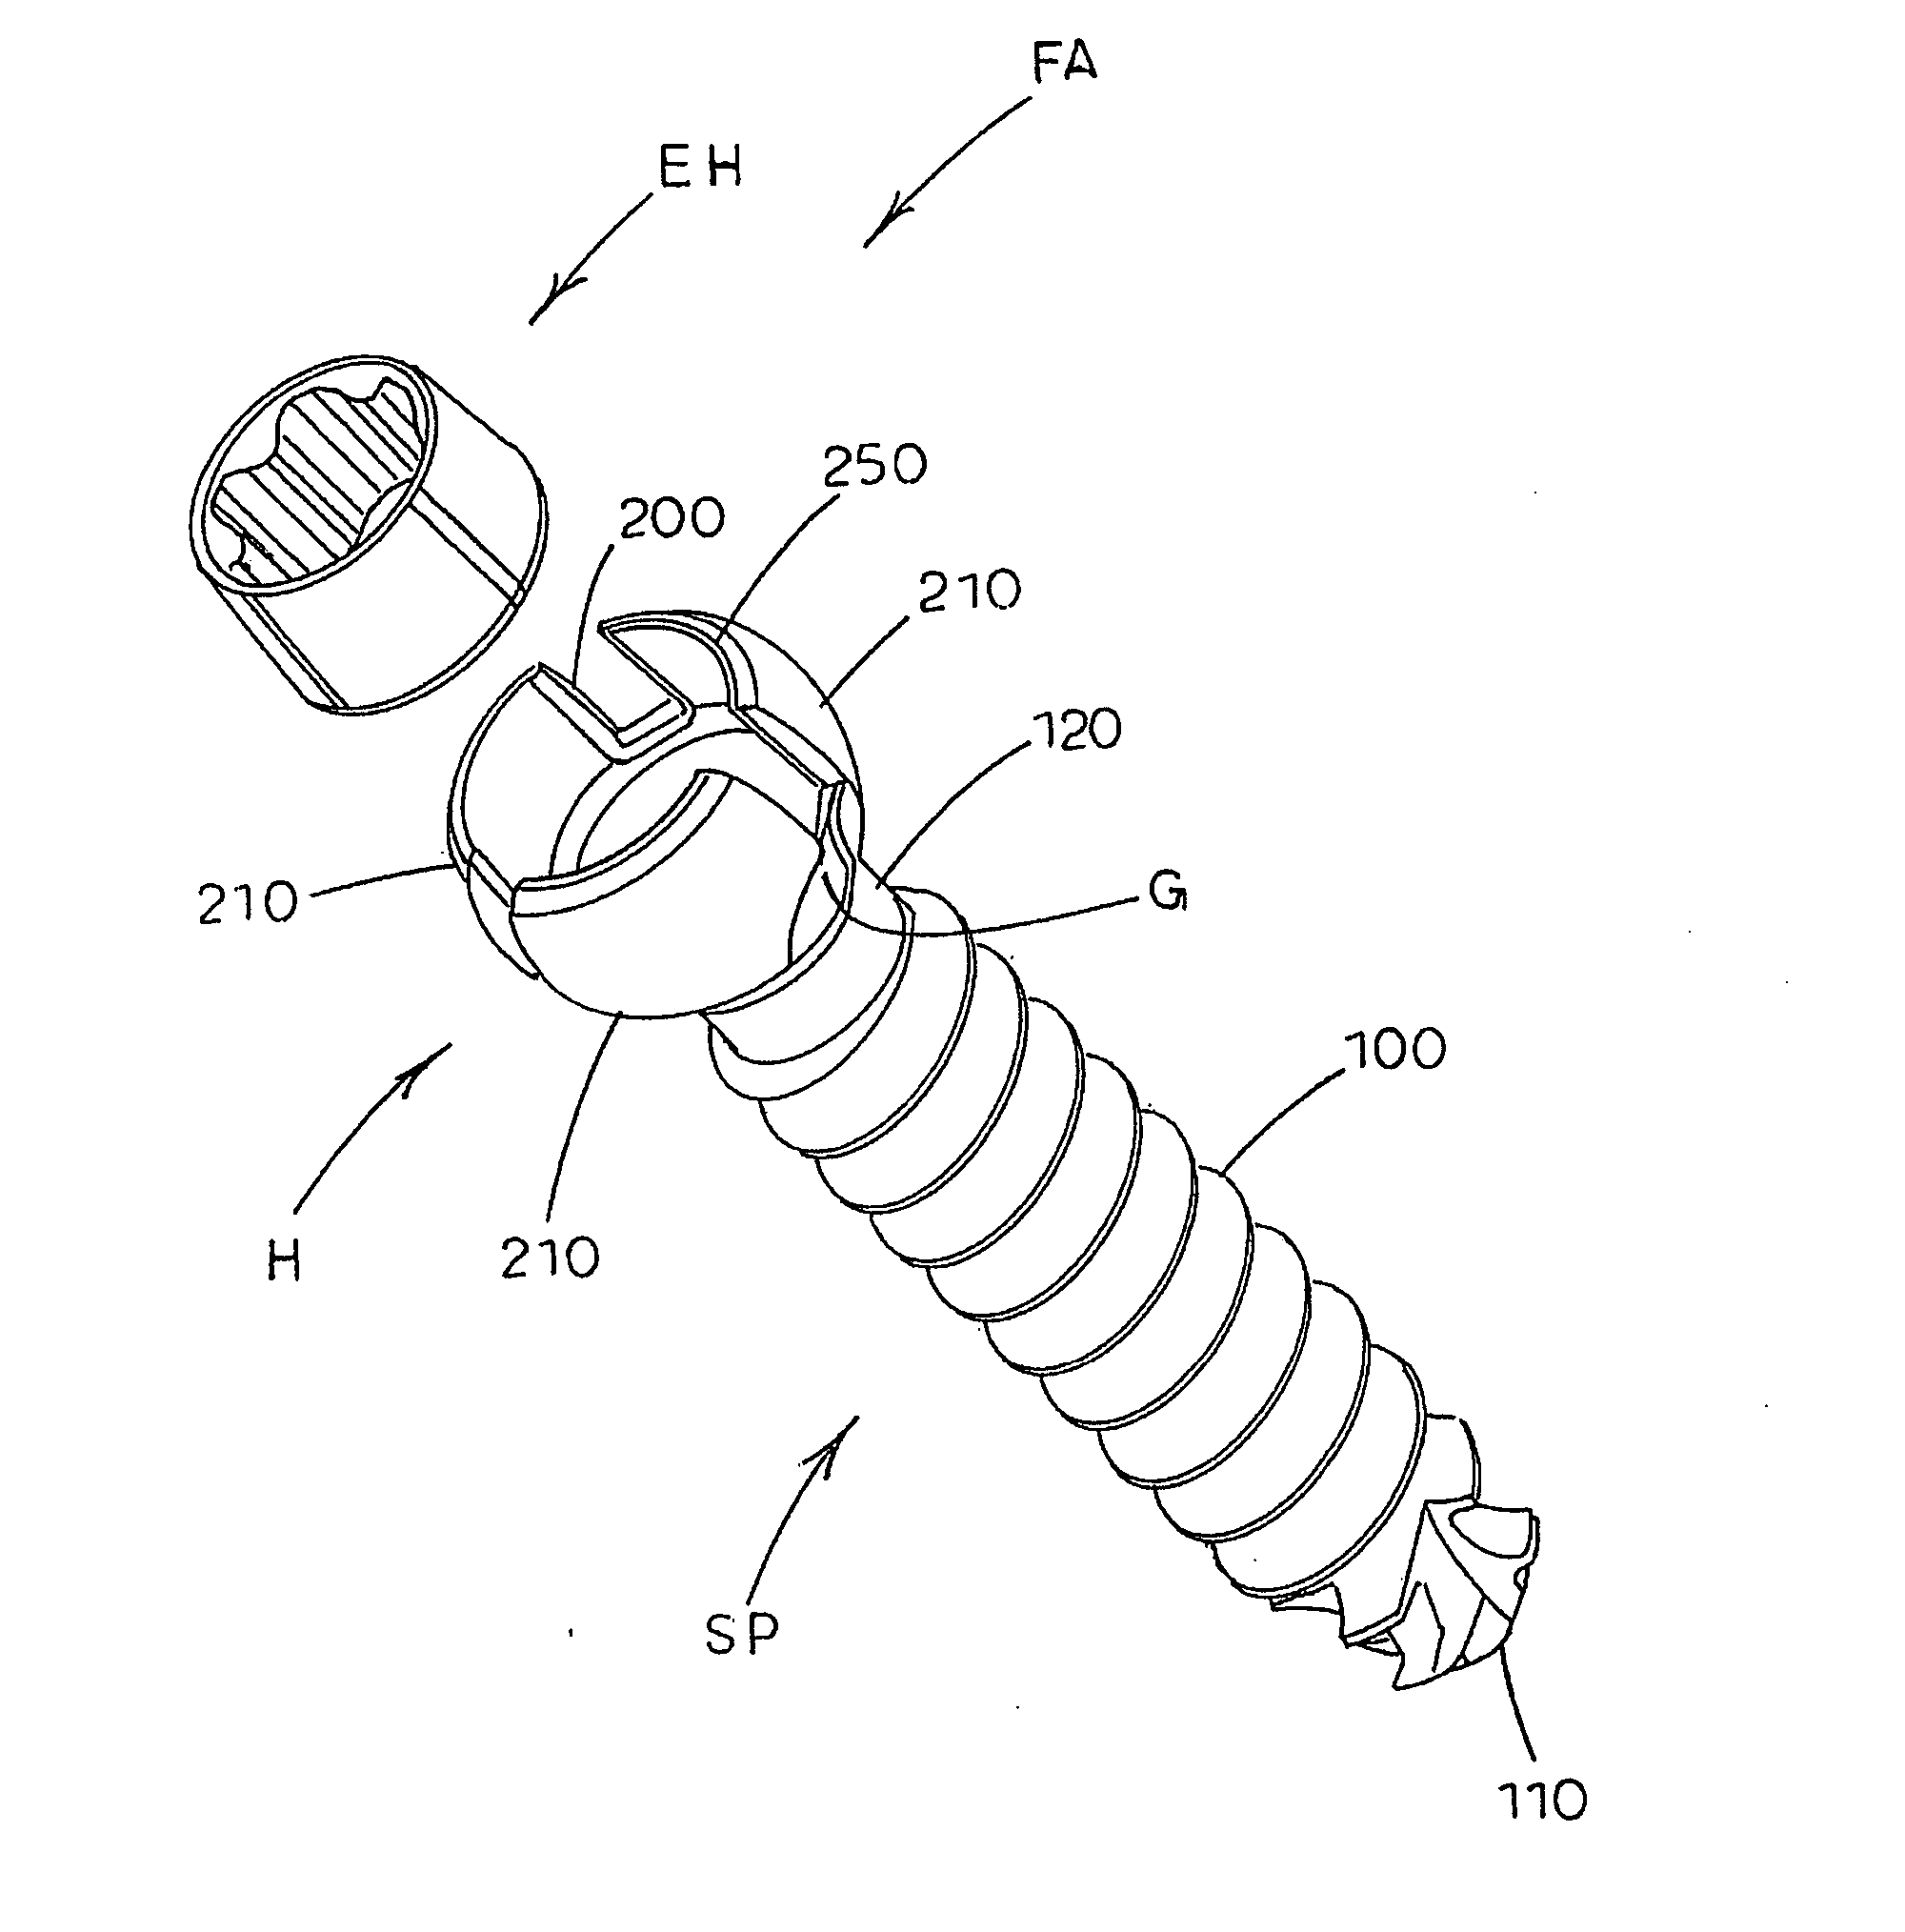 Systems and methods for bone fixation